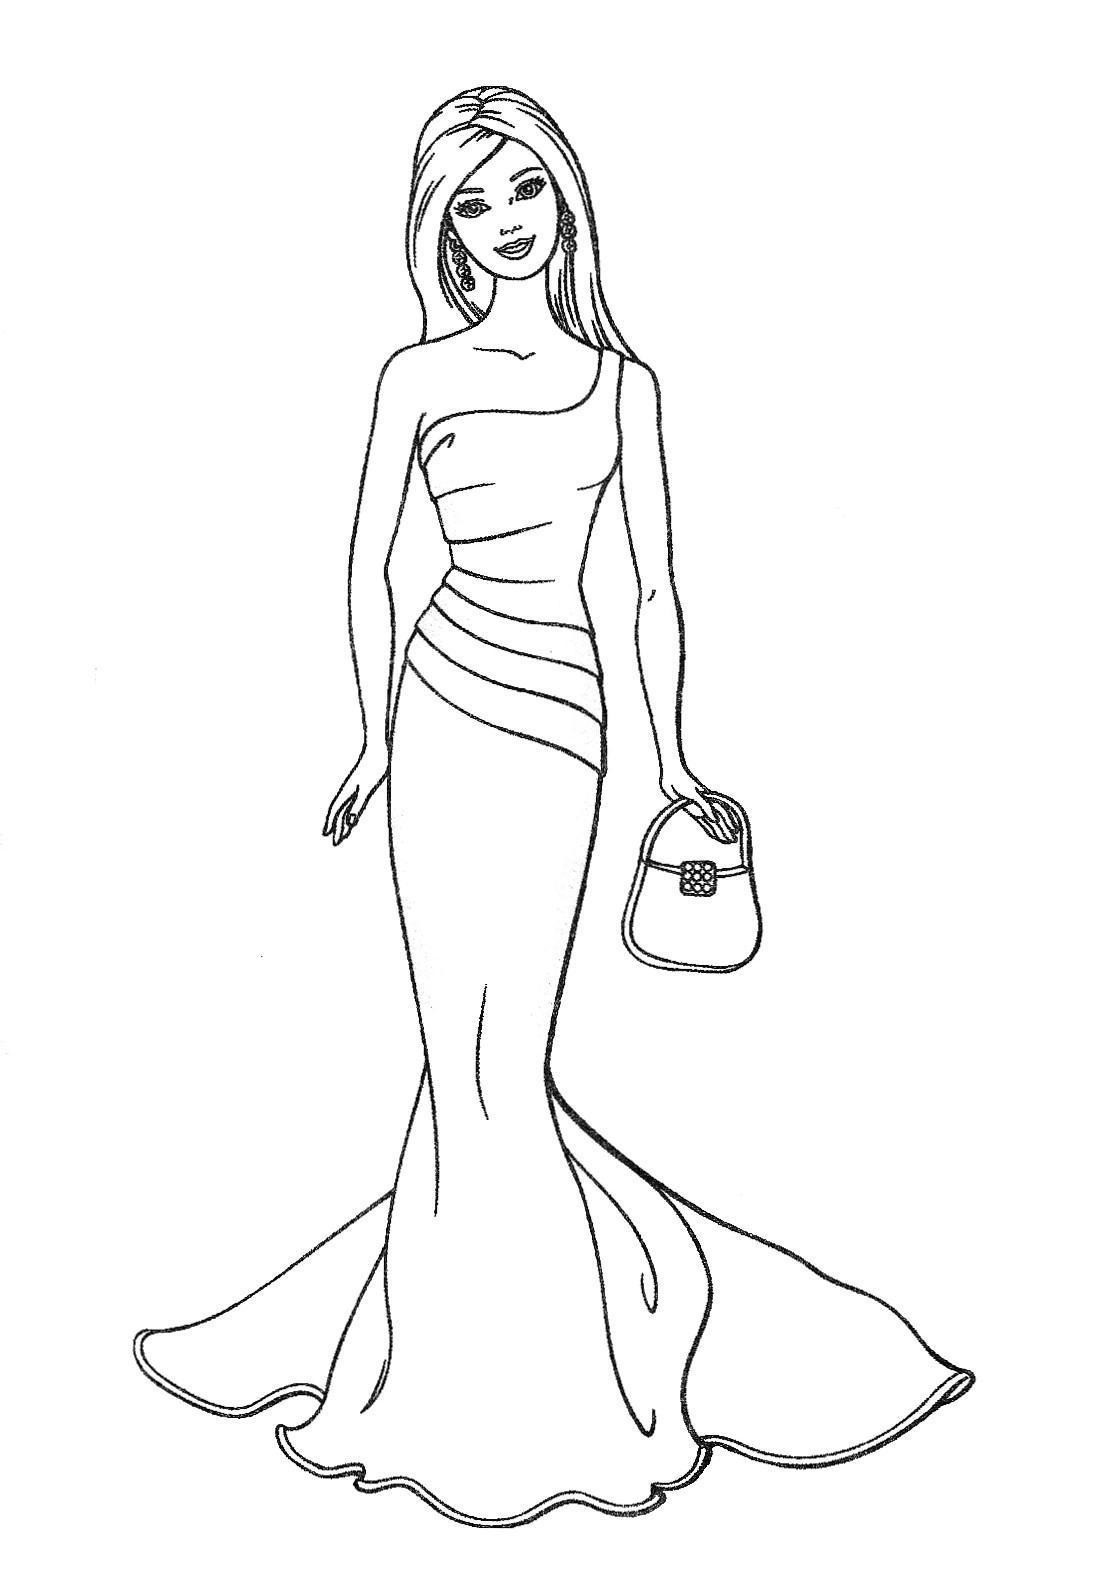 Barbie Coloring Pages For Kids
 Barbie to color for children Barbie Kids Coloring Pages